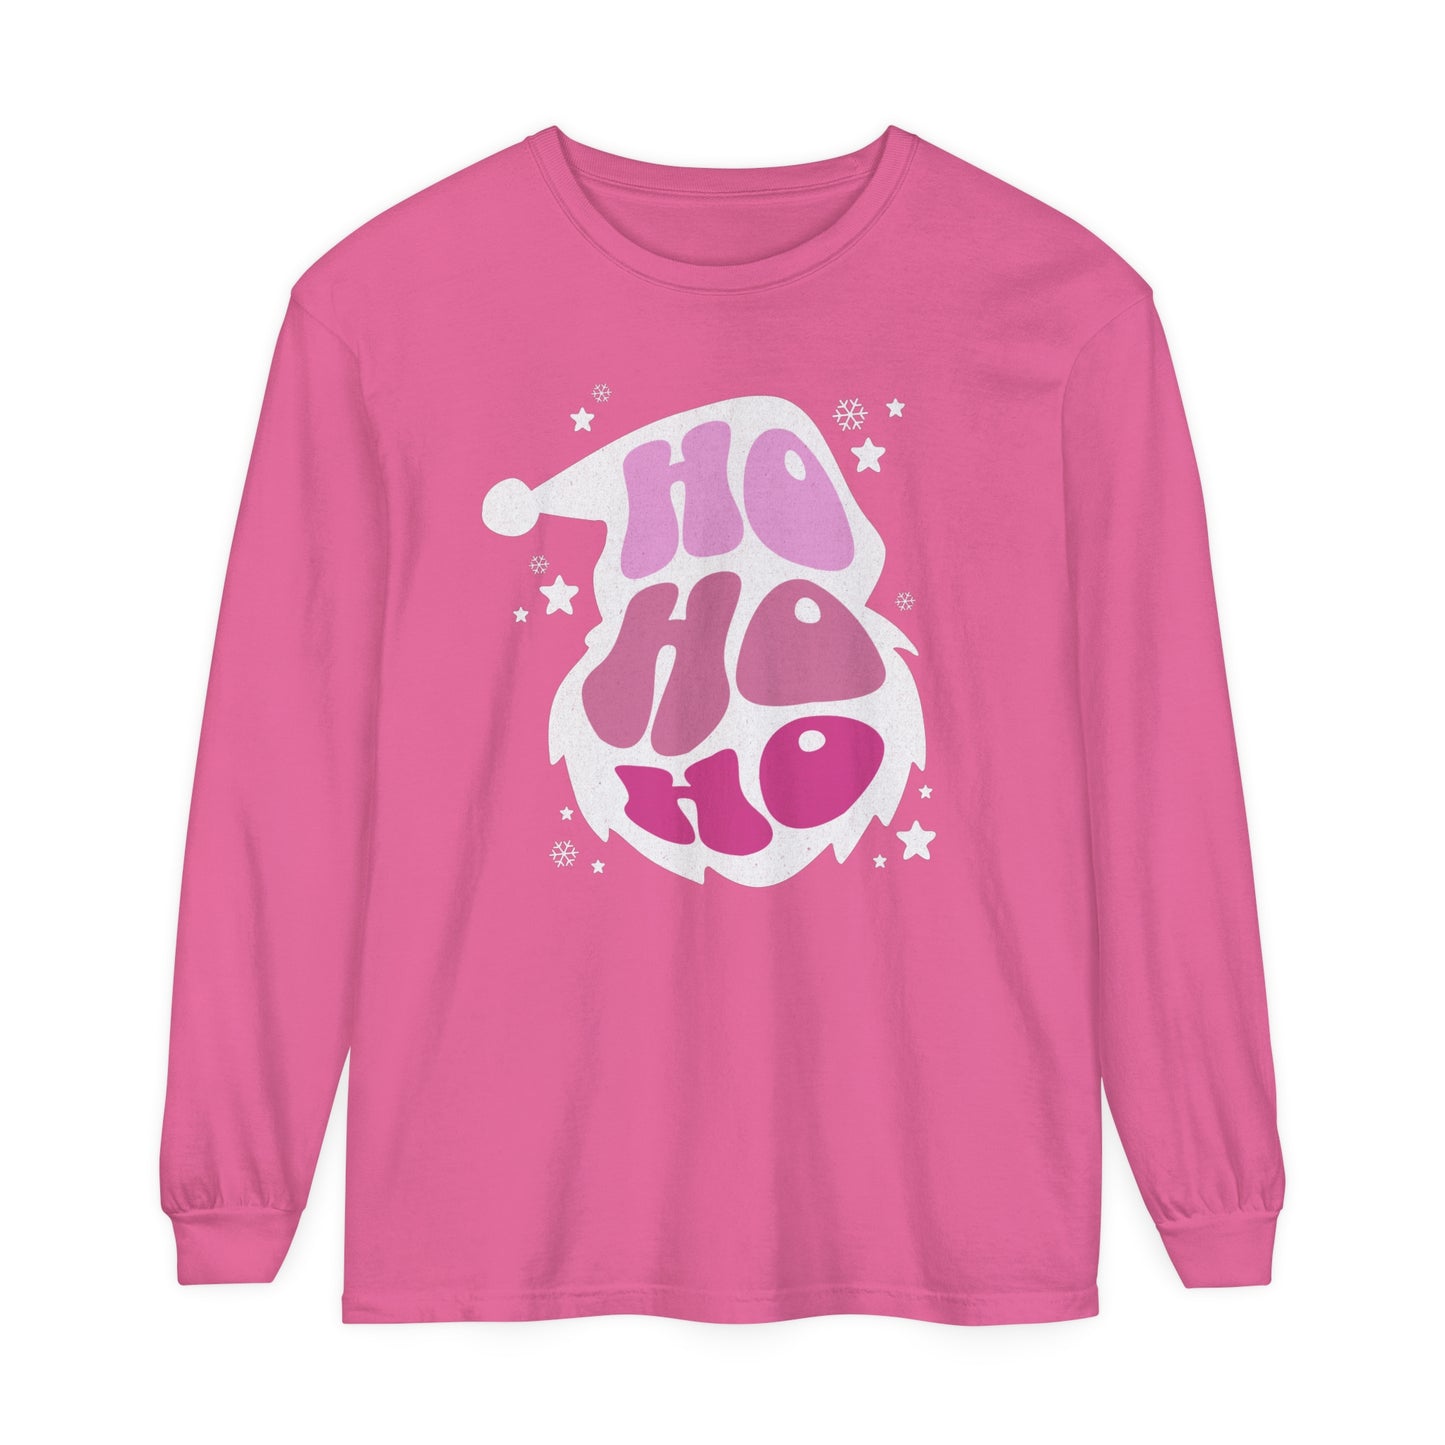 A cozy unisex long-sleeve t-shirt with a HO HO HO Santa Outline Pink Long Sleeve Tee - Cozy Comfort Colors Unisex Shirt - Crewneck Holiday tee by Printify